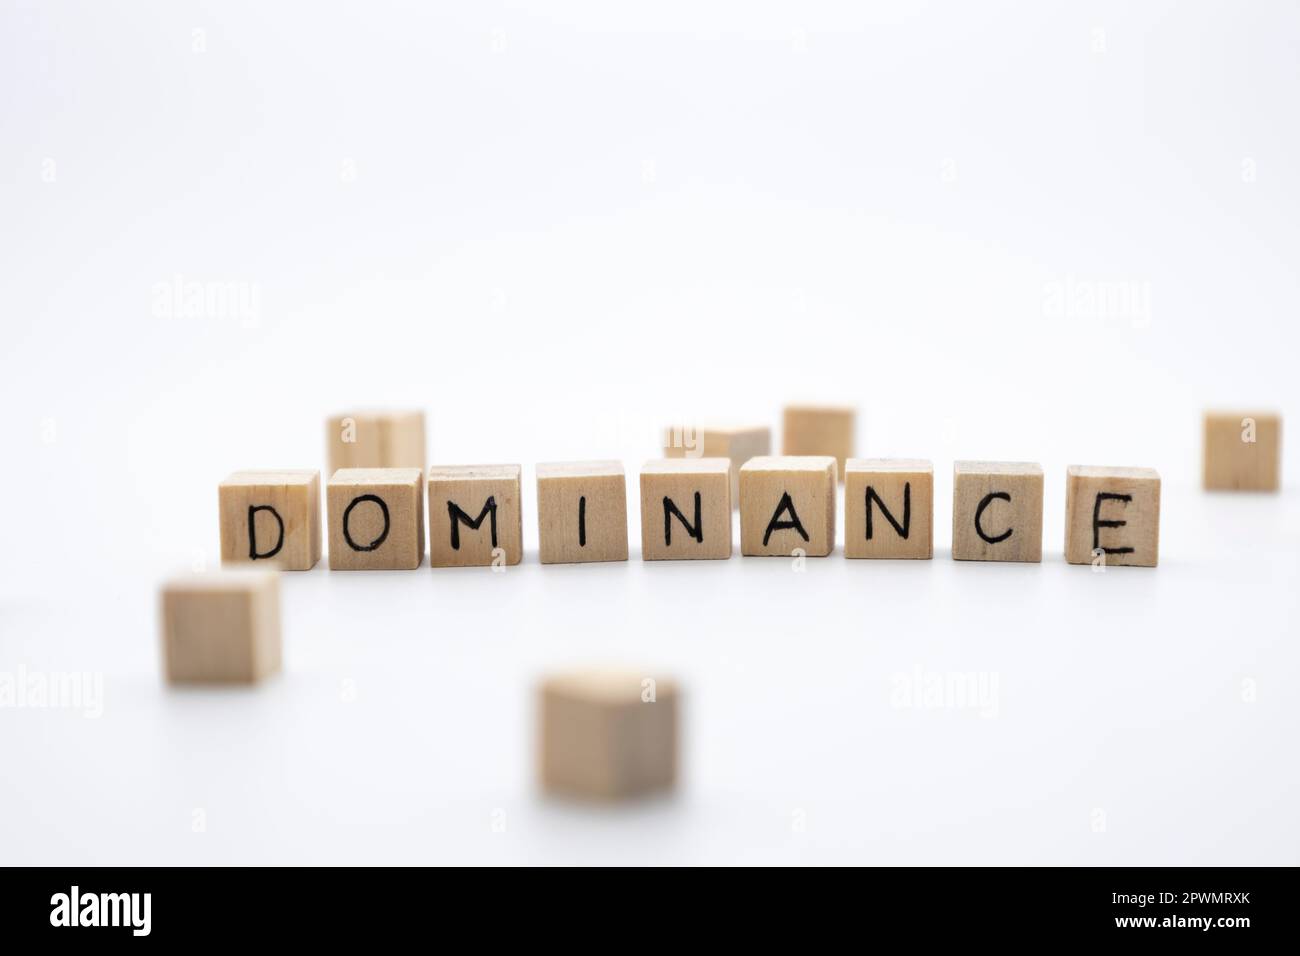 The wooden cubes with the word DOMINANCE against white background. Business, domination concept. Stock Photo